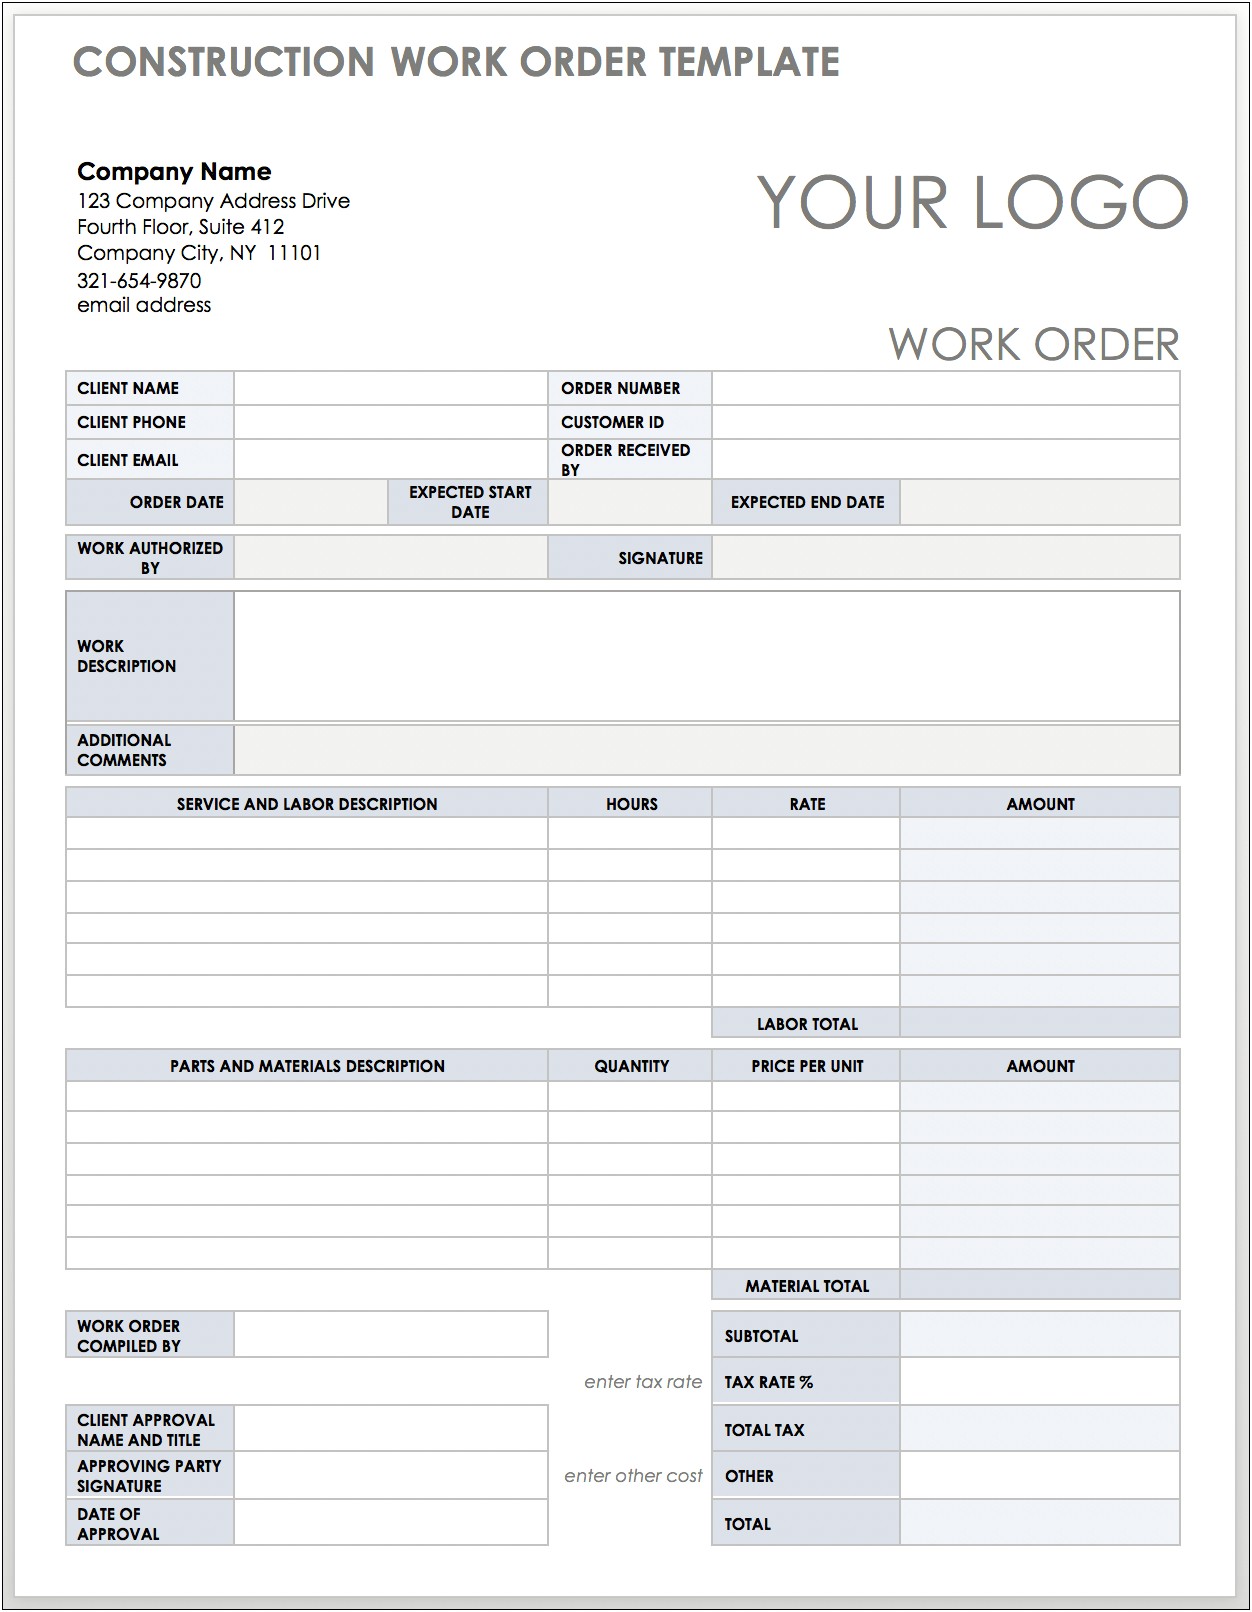 Subcontractor Agreement Template Free Download Australia